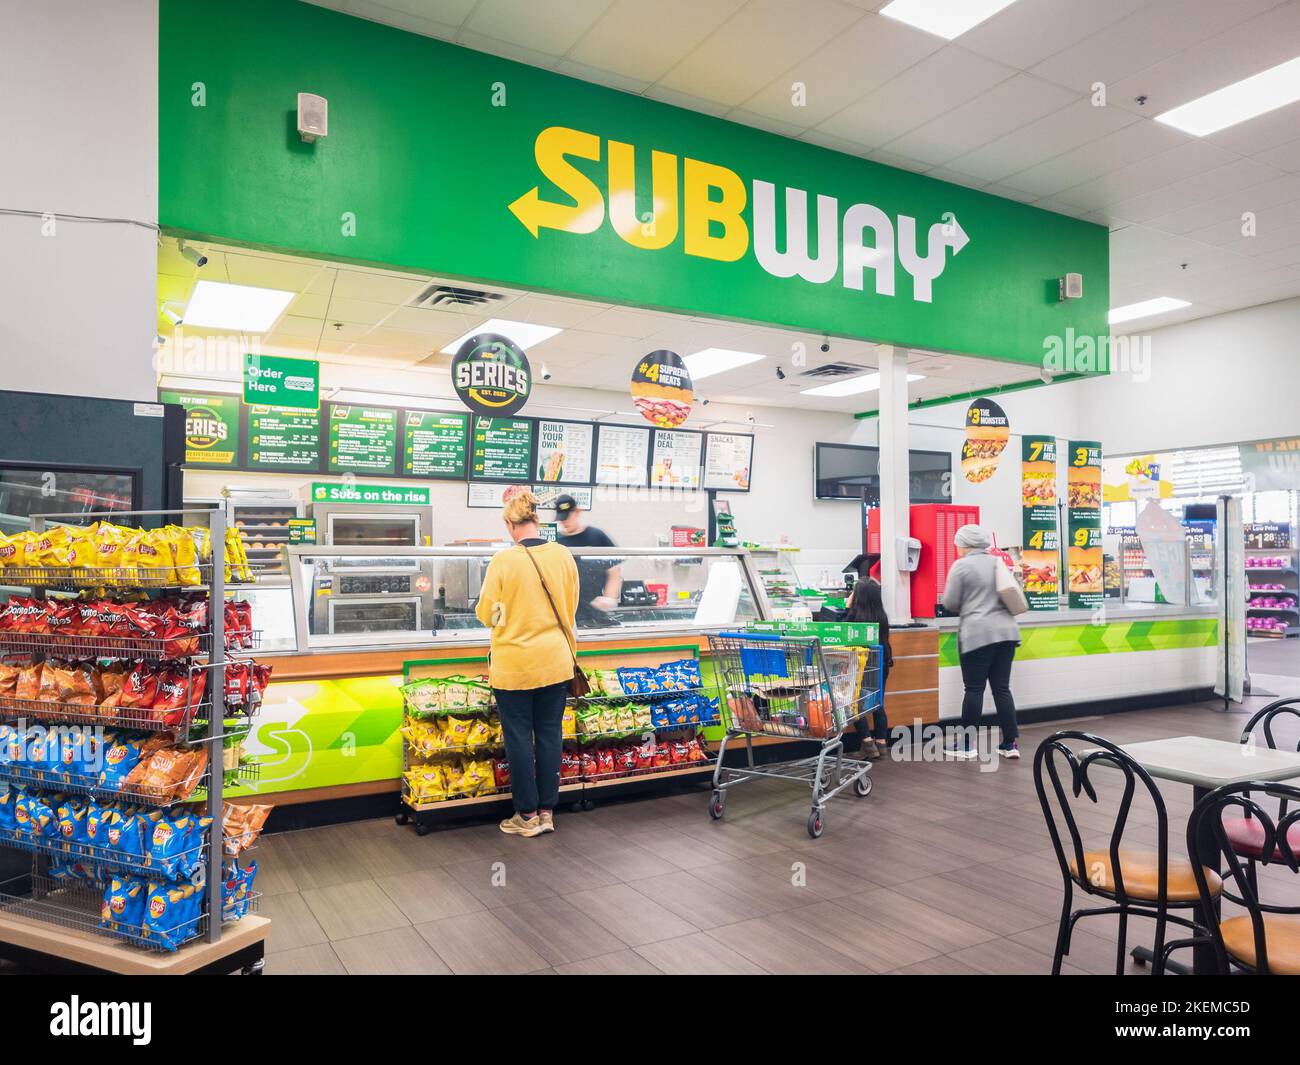 New Hartford, New York - Nov 3, 2022: Landscape View of Subway Restaurant Interior with Customers Buying Food. Stock Photo